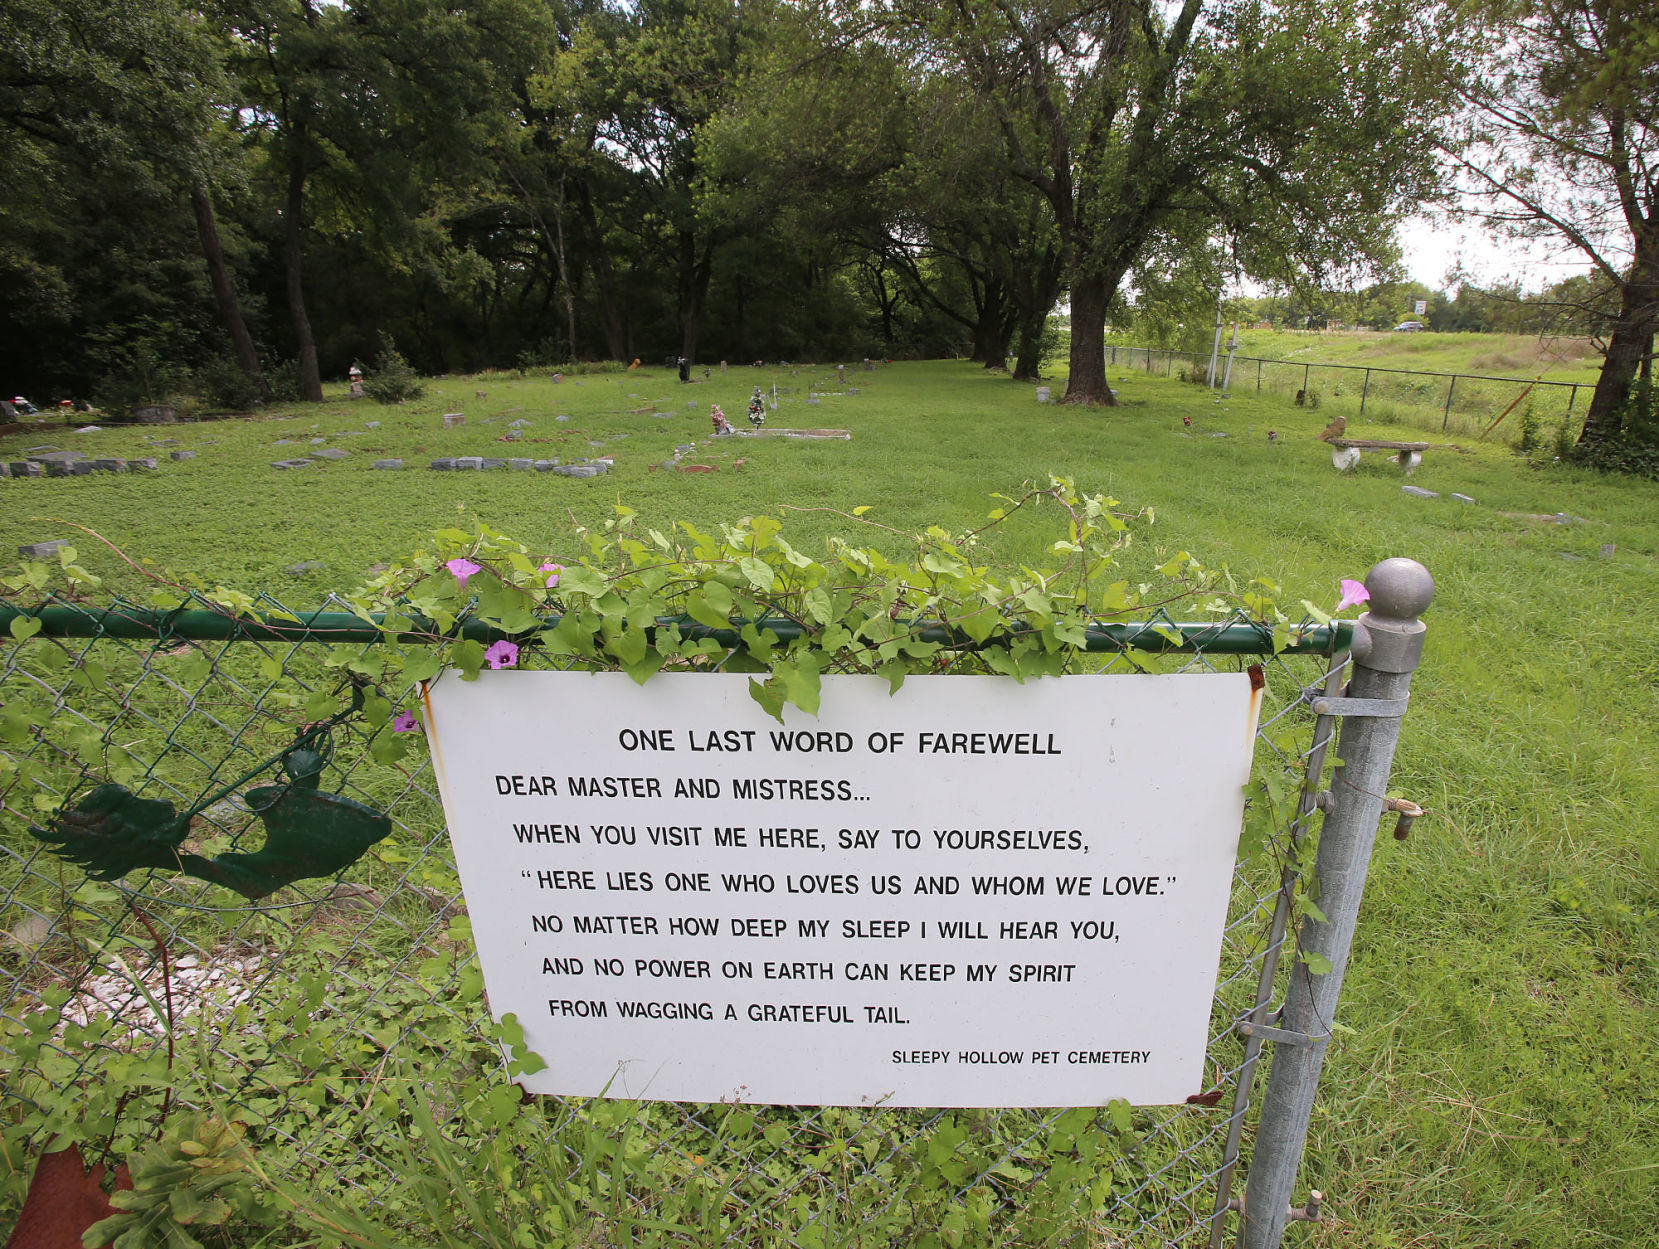 Sleepy Hollow Pet Cemetery offers place 